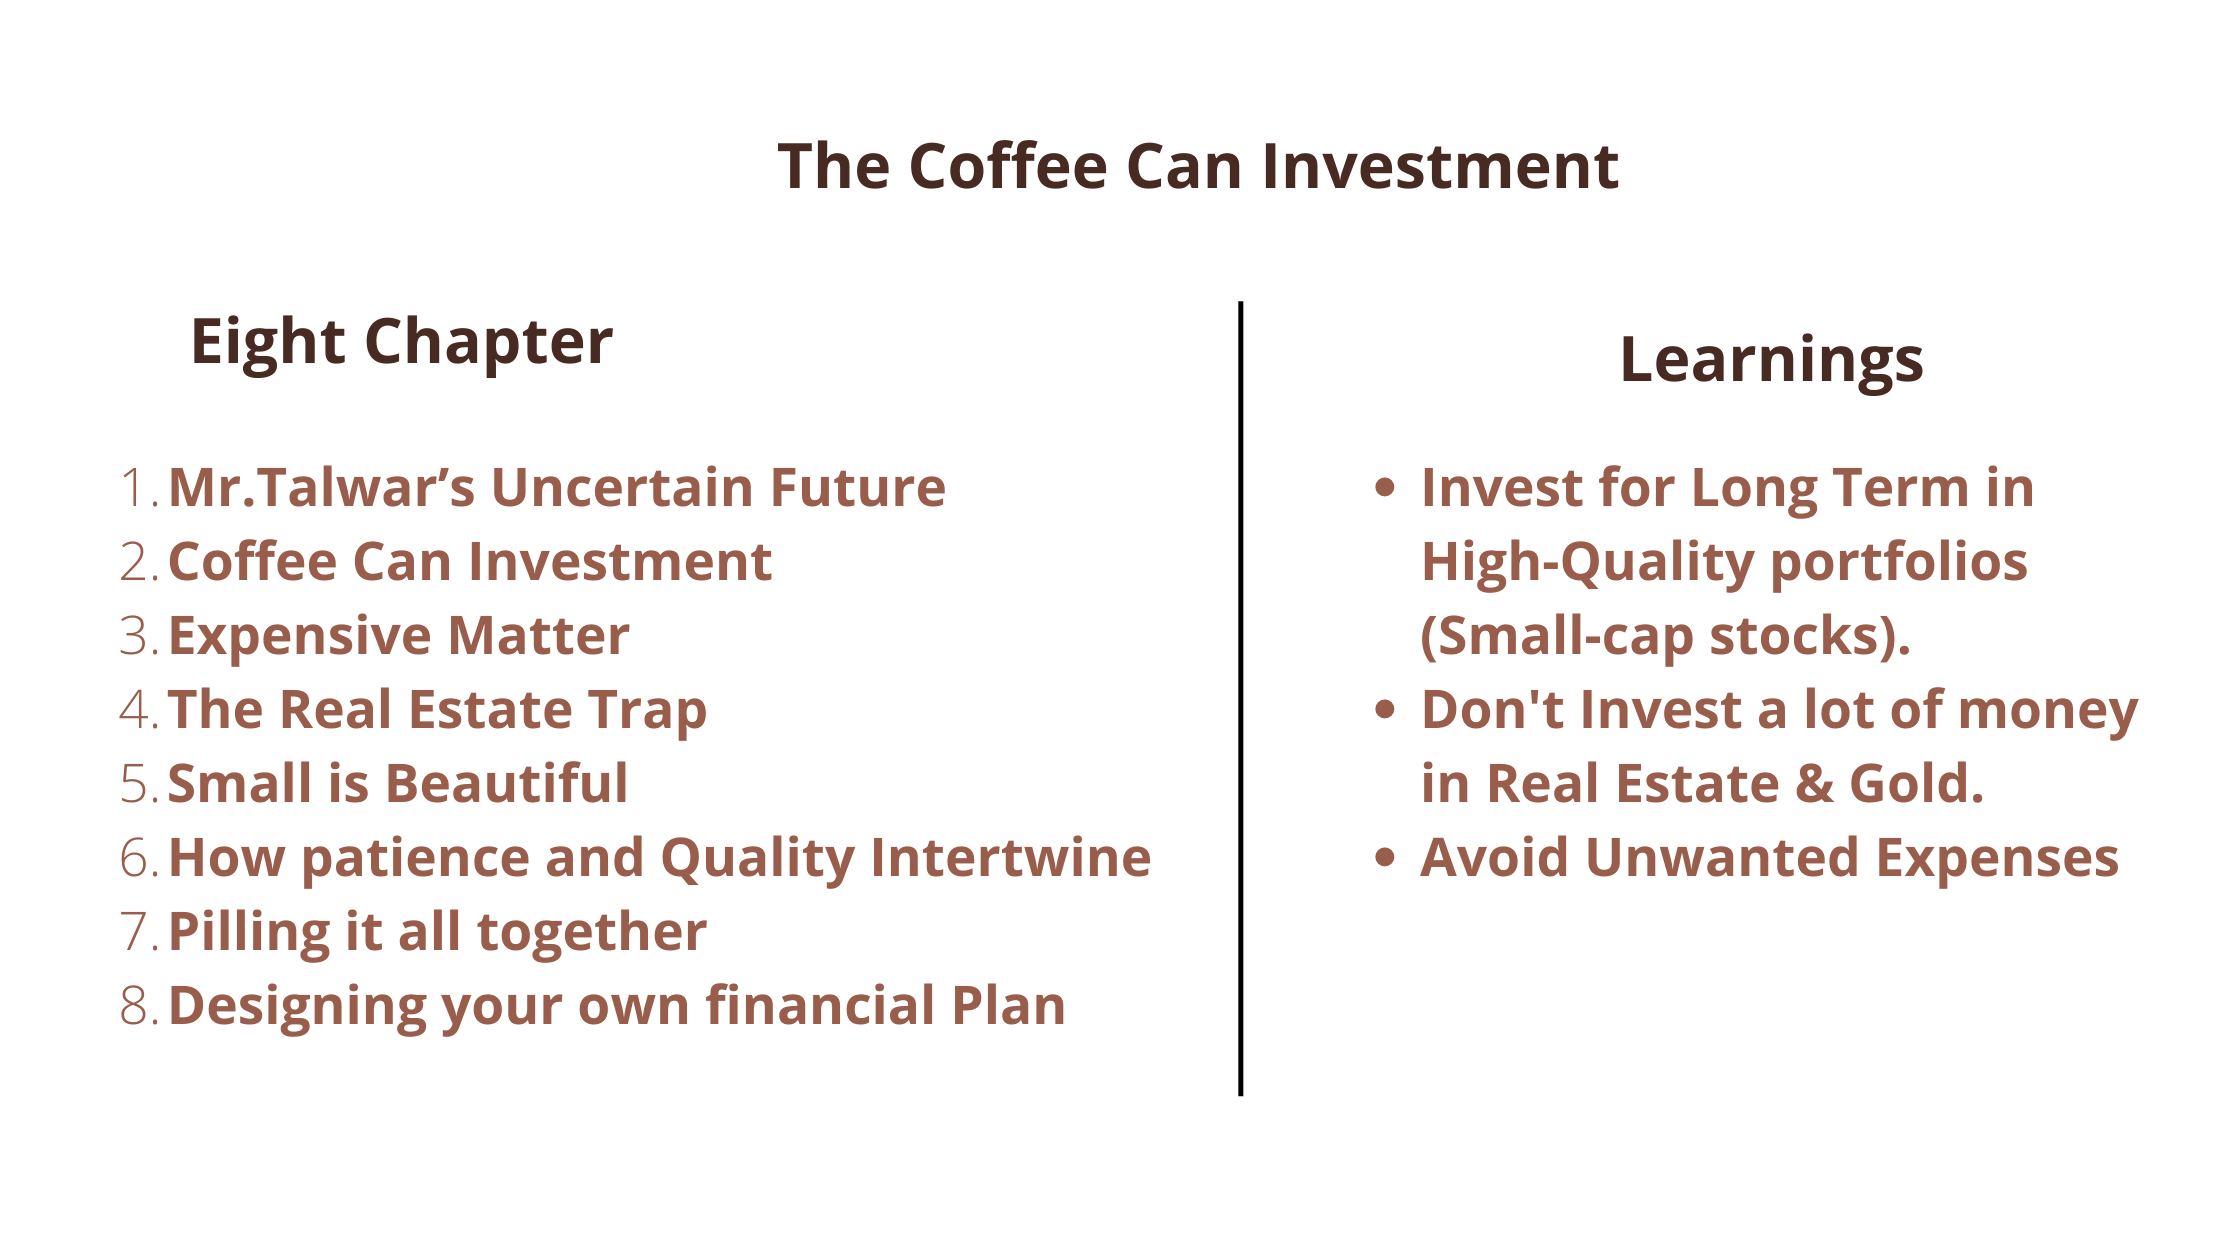 The Coffee Can Investment book Review- Eight Chapter and Lesson learned